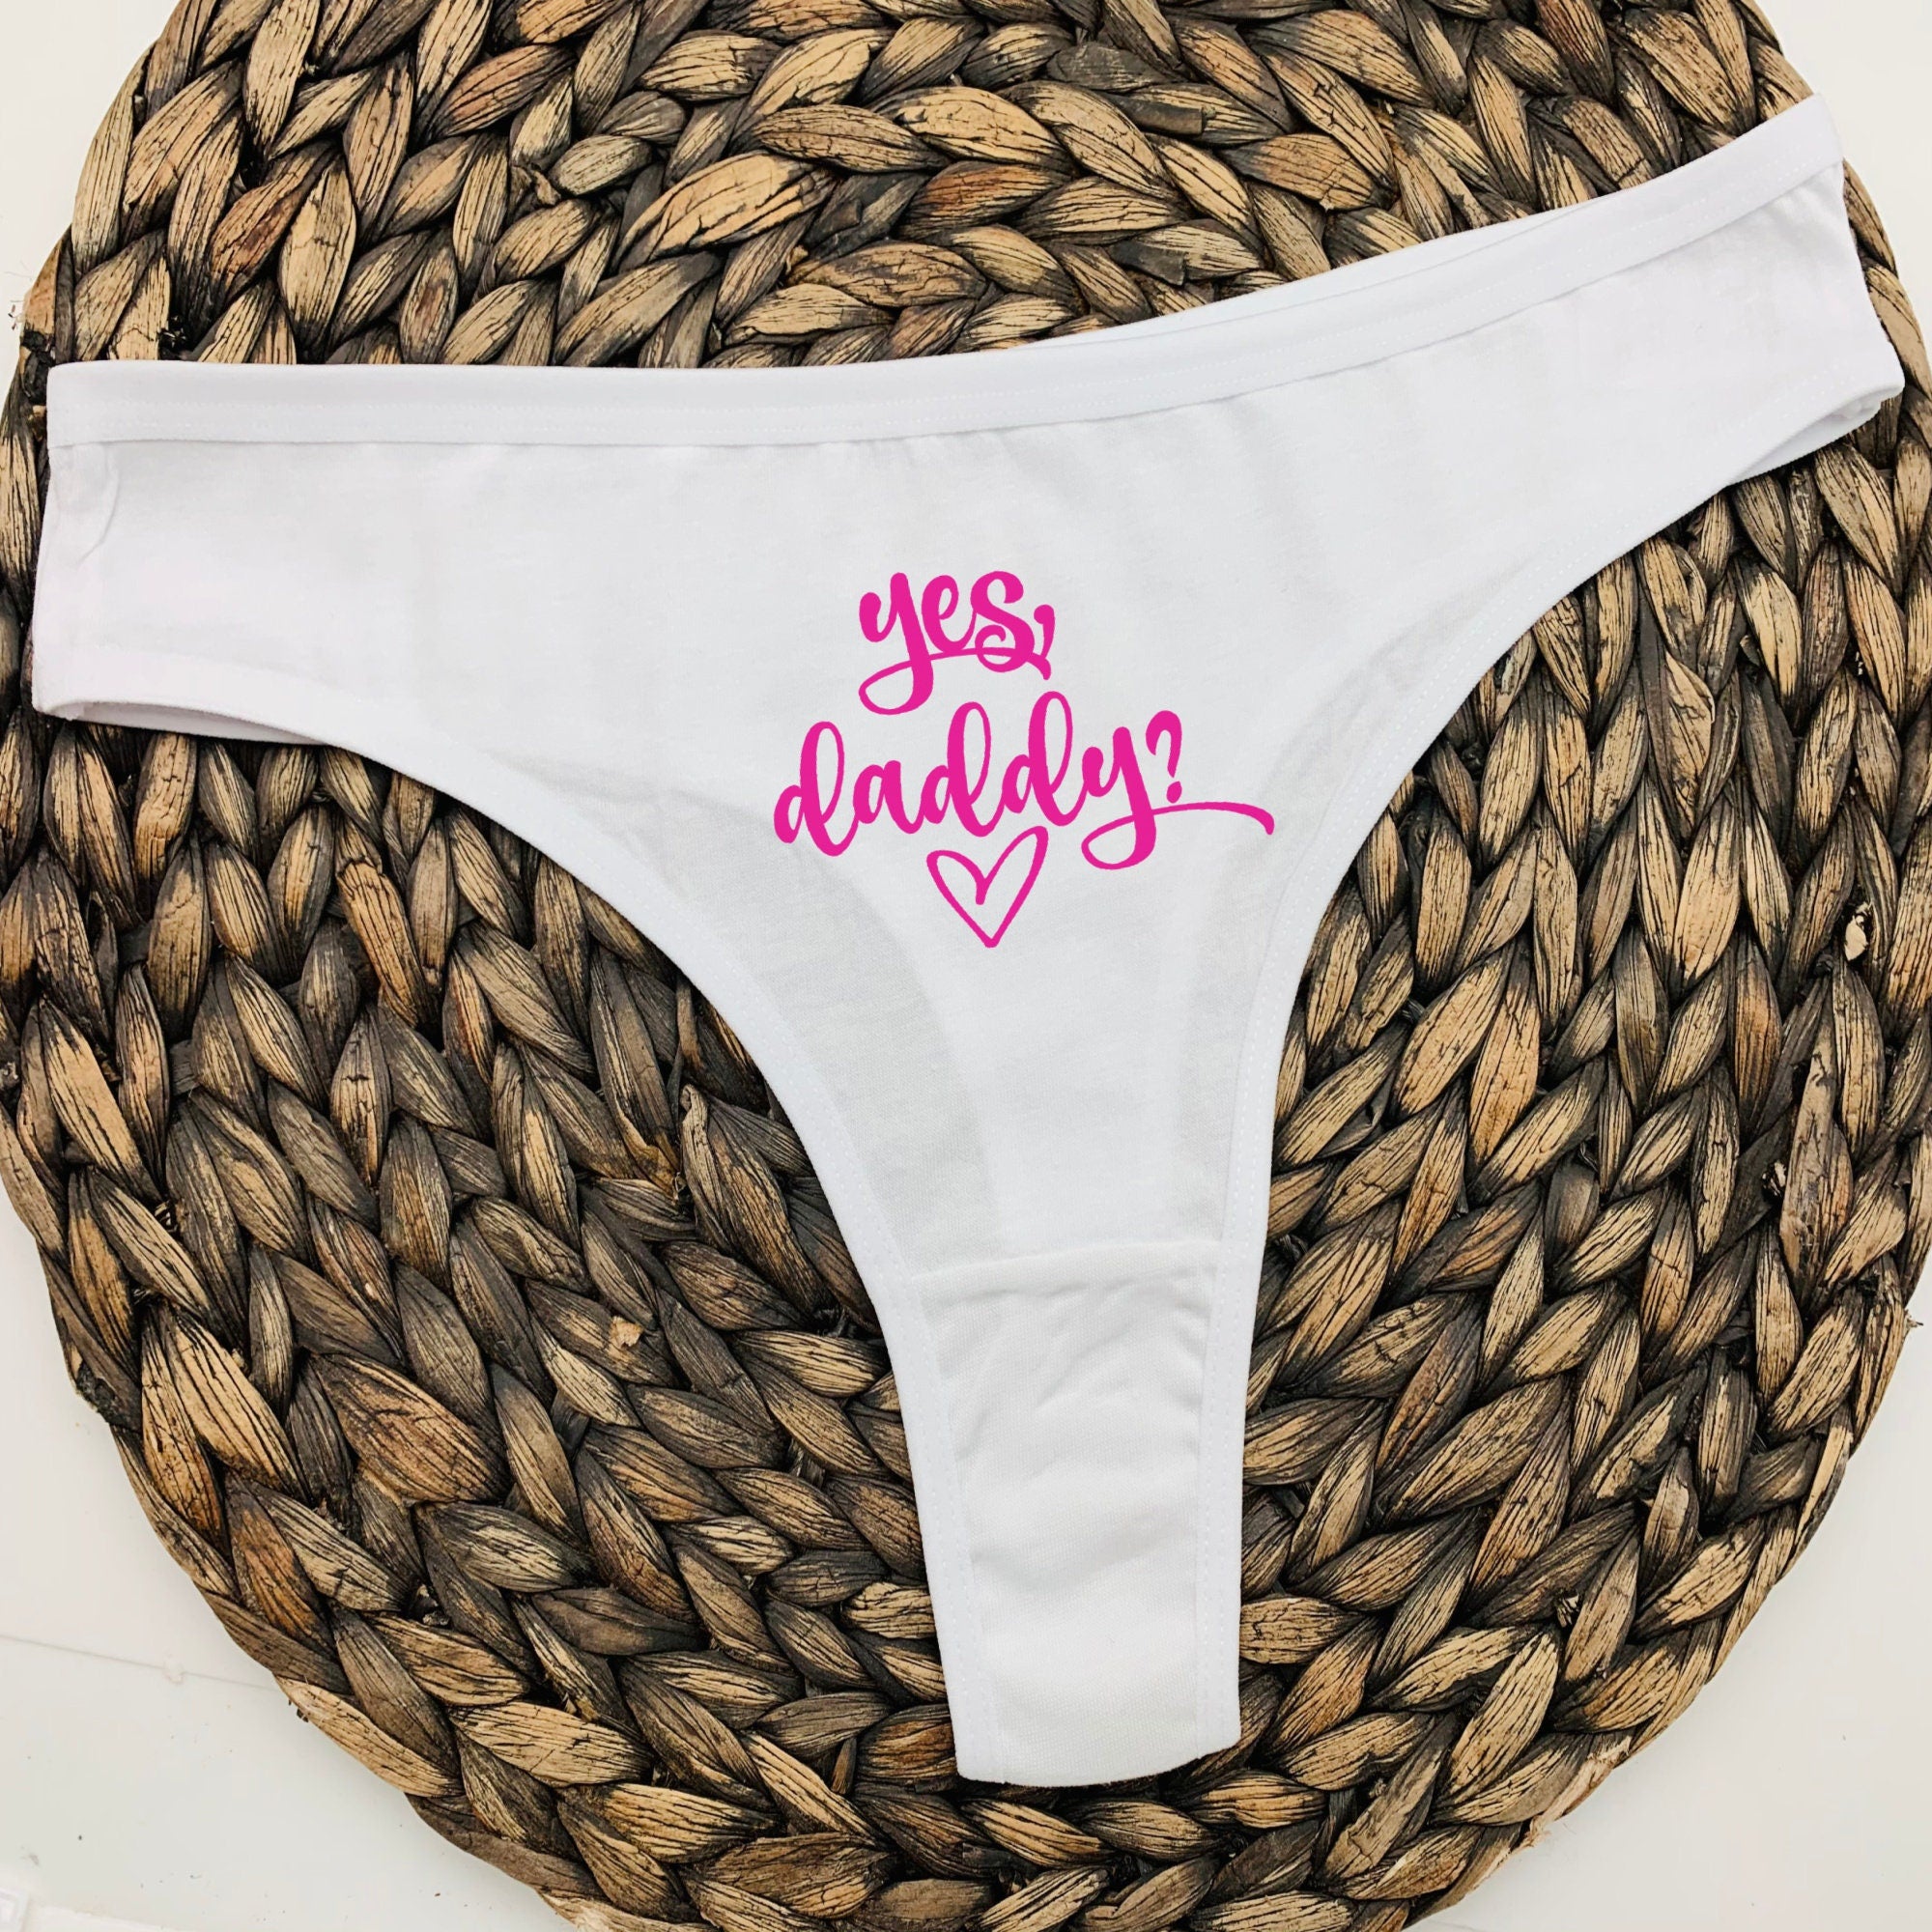 Funny Valentine's Gift for Her - 'Yes, Daddy' Thong - Playful and Comfortable Lingerie